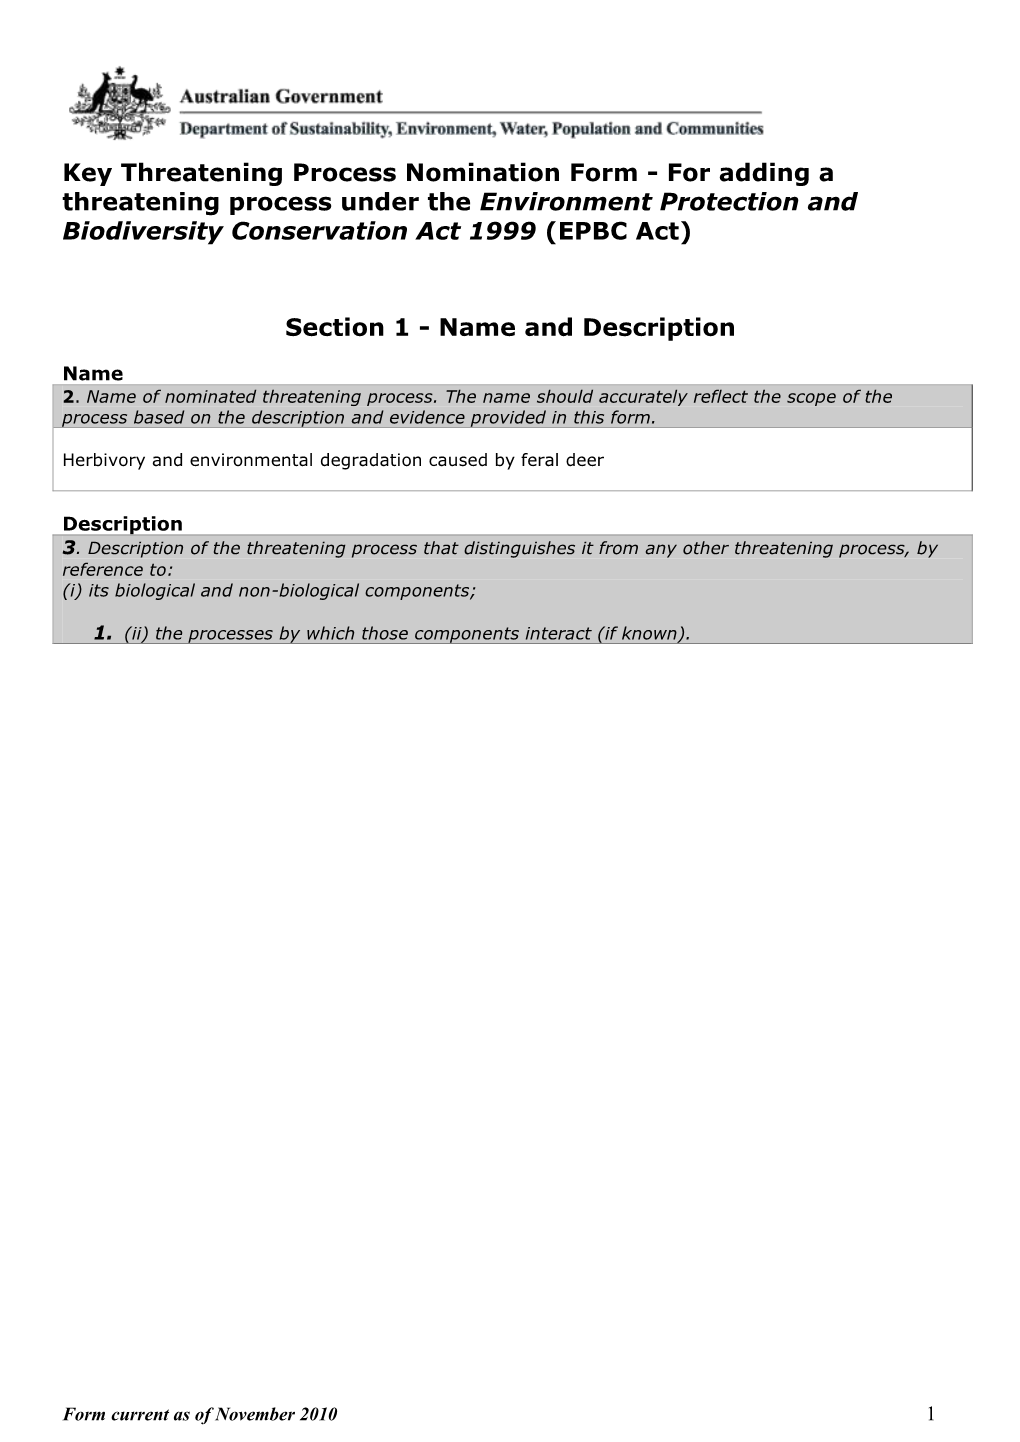 Key Threatening Process Nomination Form - for Adding a Threatening Process Under the Environment Protection and Biodiversity Conservation Act 1999 (EPBC Act)